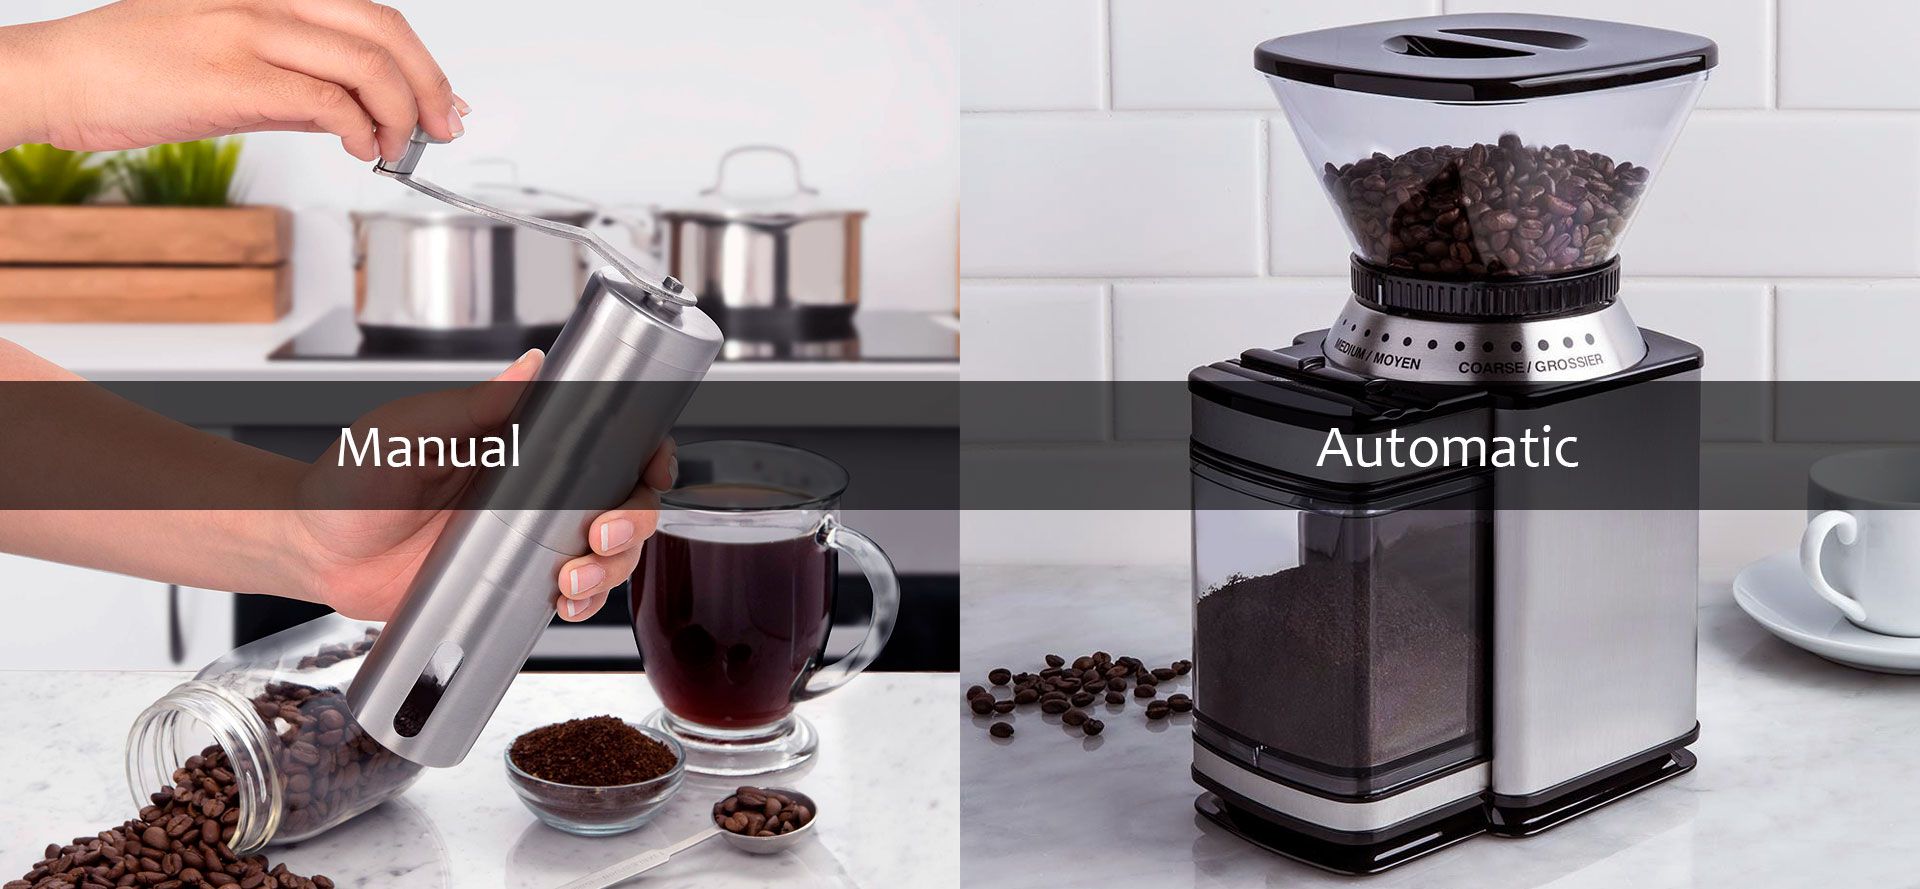 Manual And Automatic Burr Coffee Grinders.